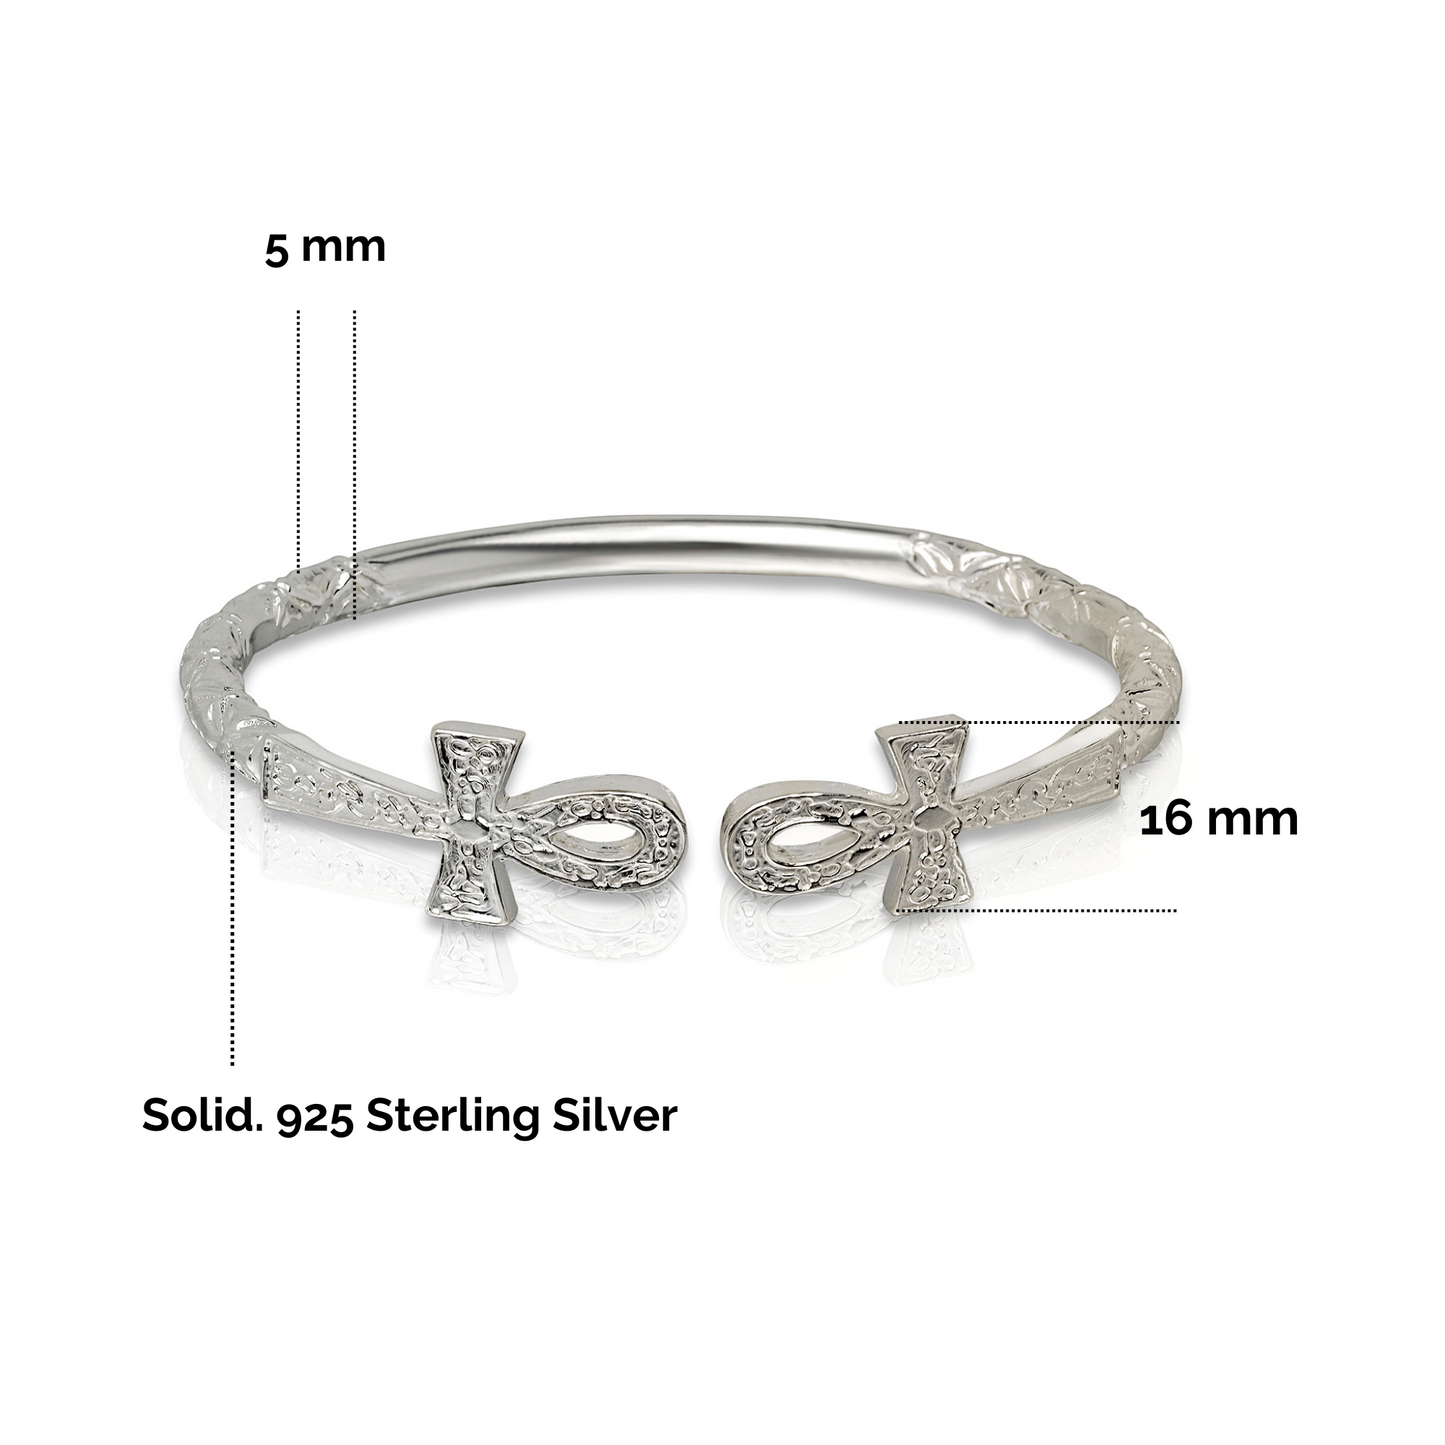 Better Jewelry Solid .925 West Indian Silver Bangle with Large Ankh Cross Ends (Made in USA), 1 piece